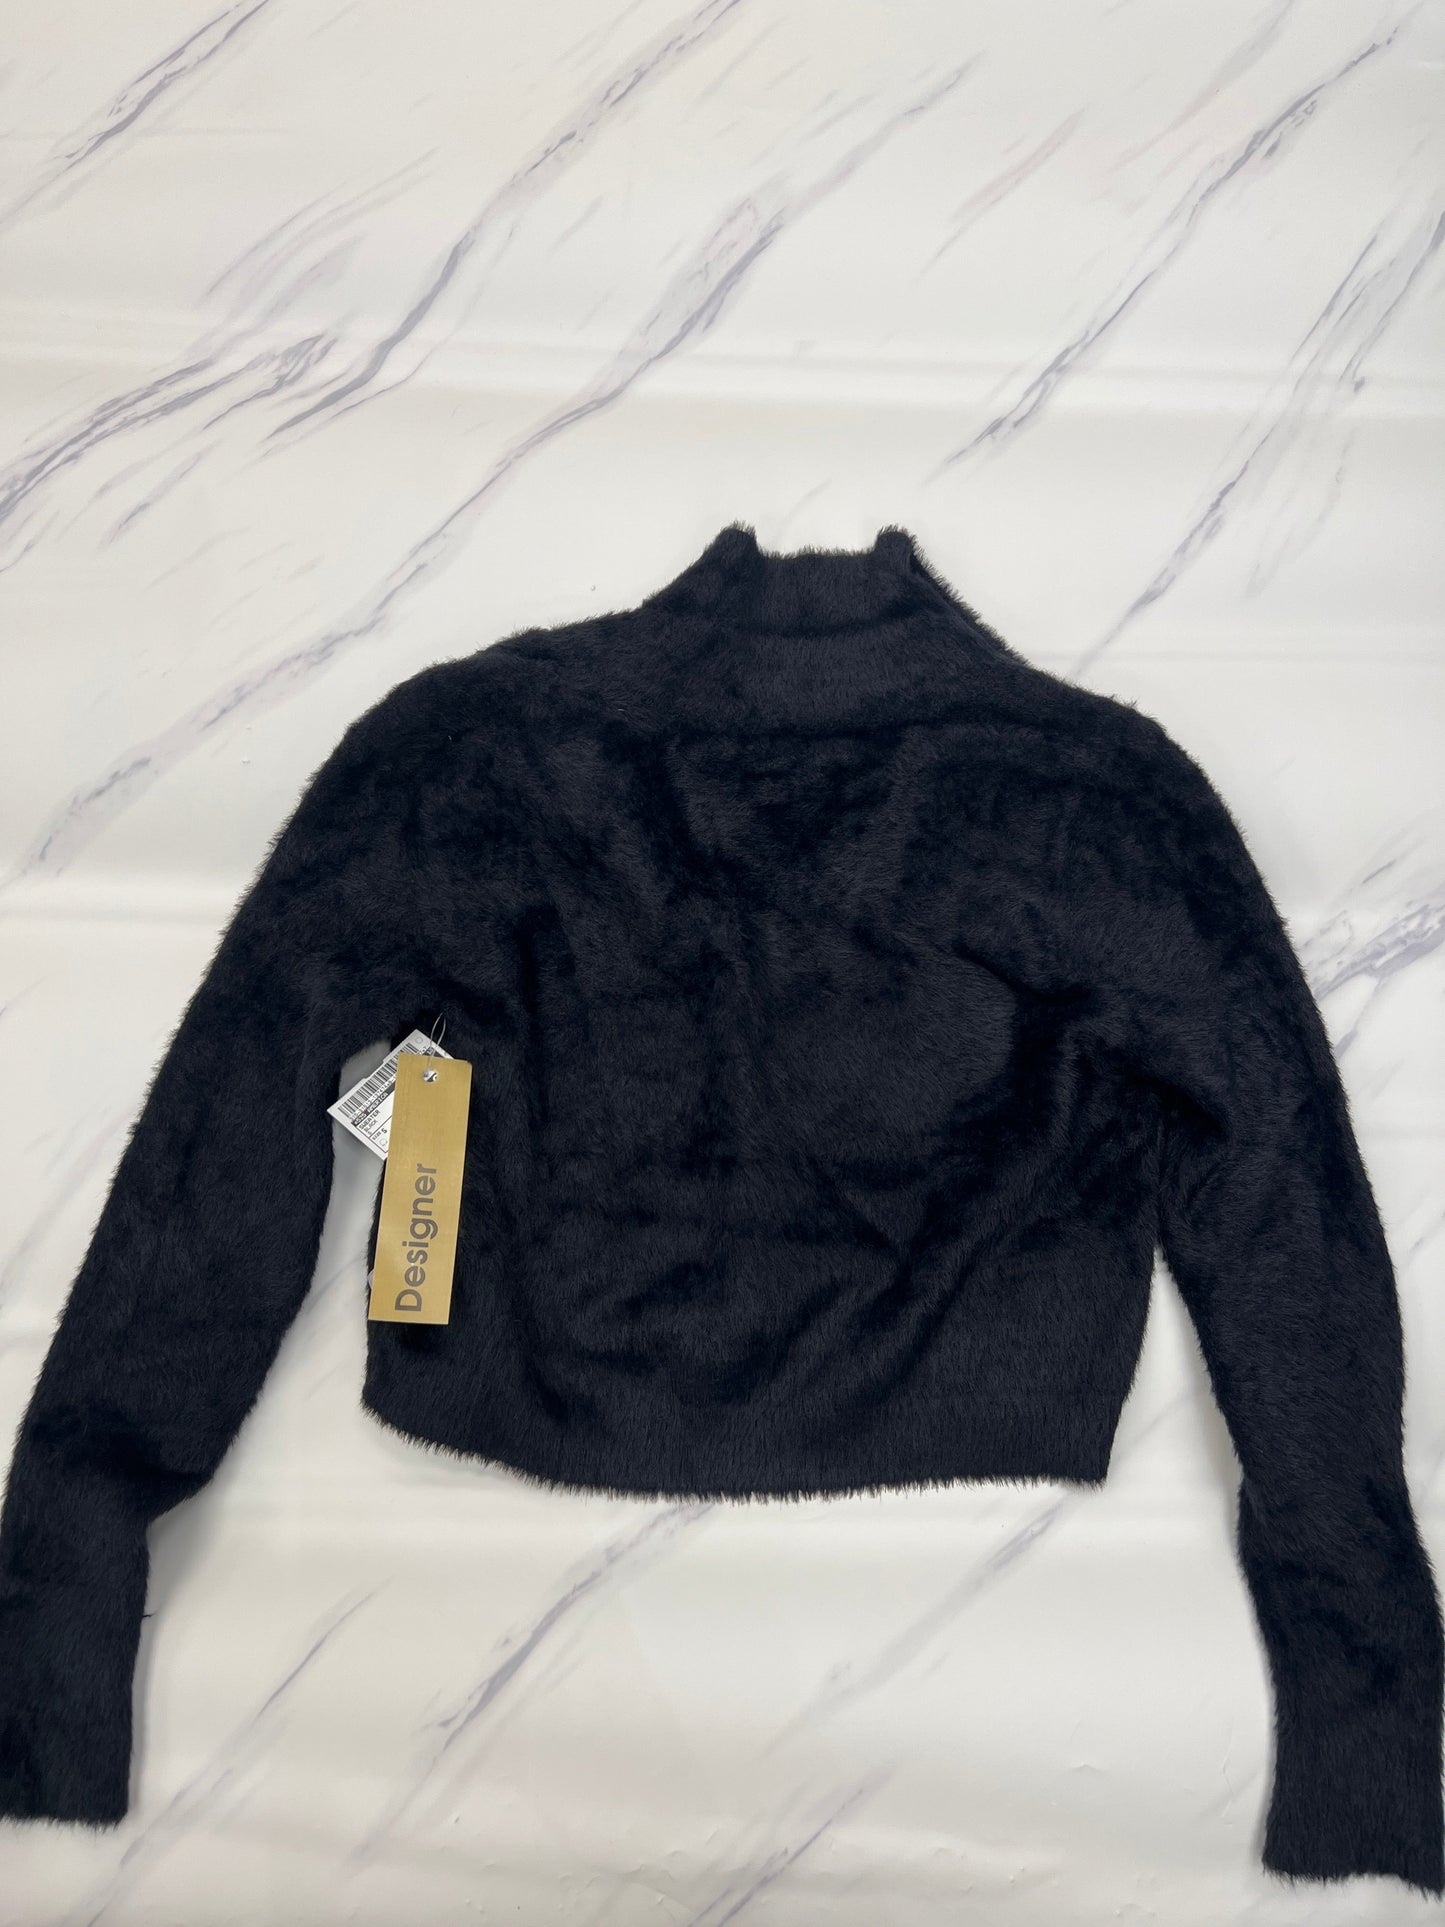 Sweater By 525 America  Size: S